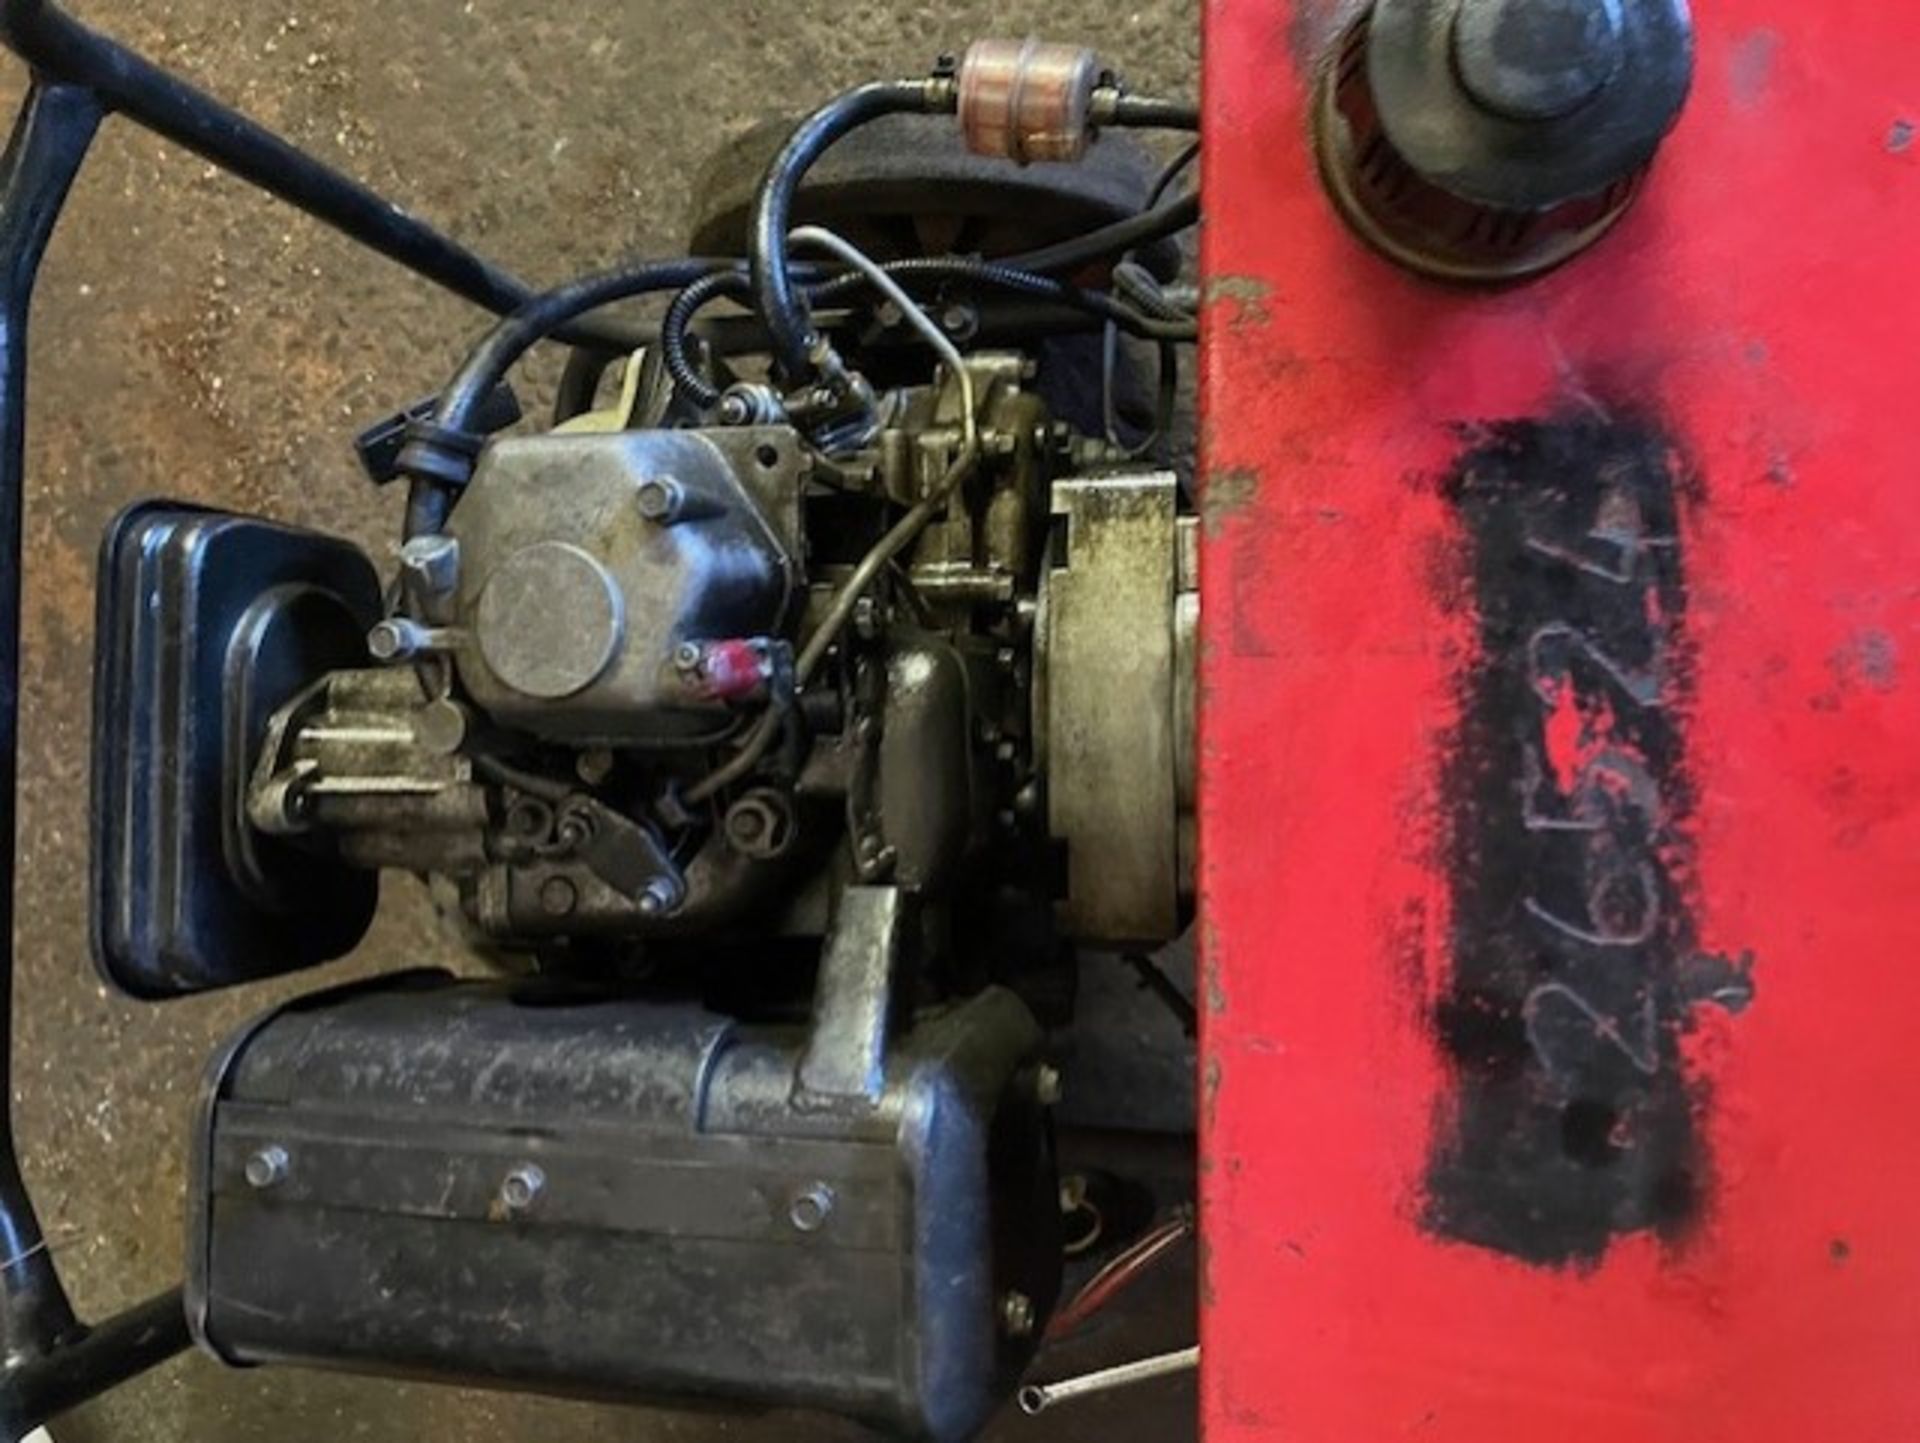 Generator with yanmar diesel engine won’t start so sold as not working - Image 5 of 5